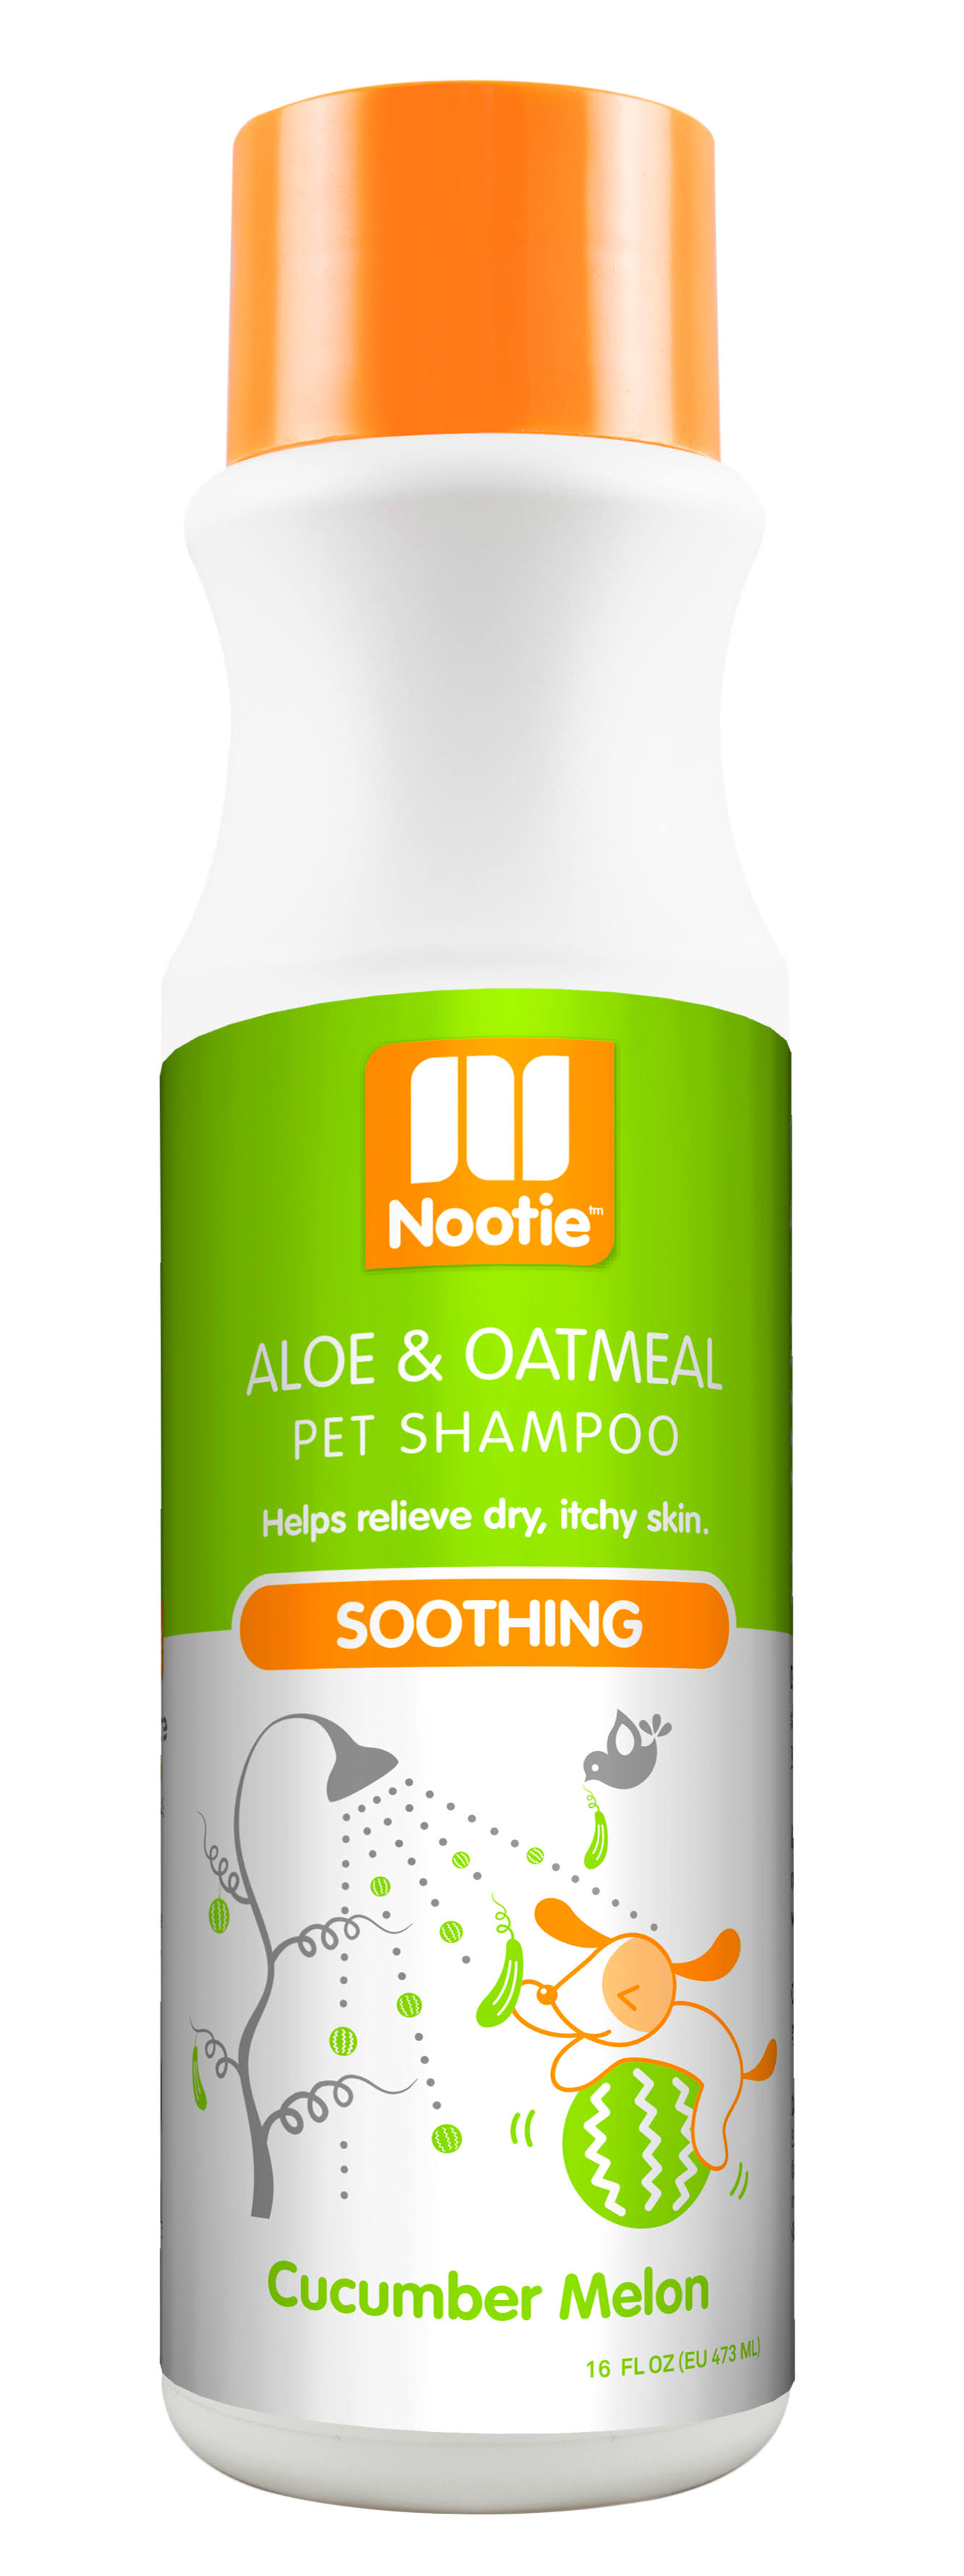 Nootie Soothing Aloe and Oatmeal Pet Shampoo - Cucumber Melon